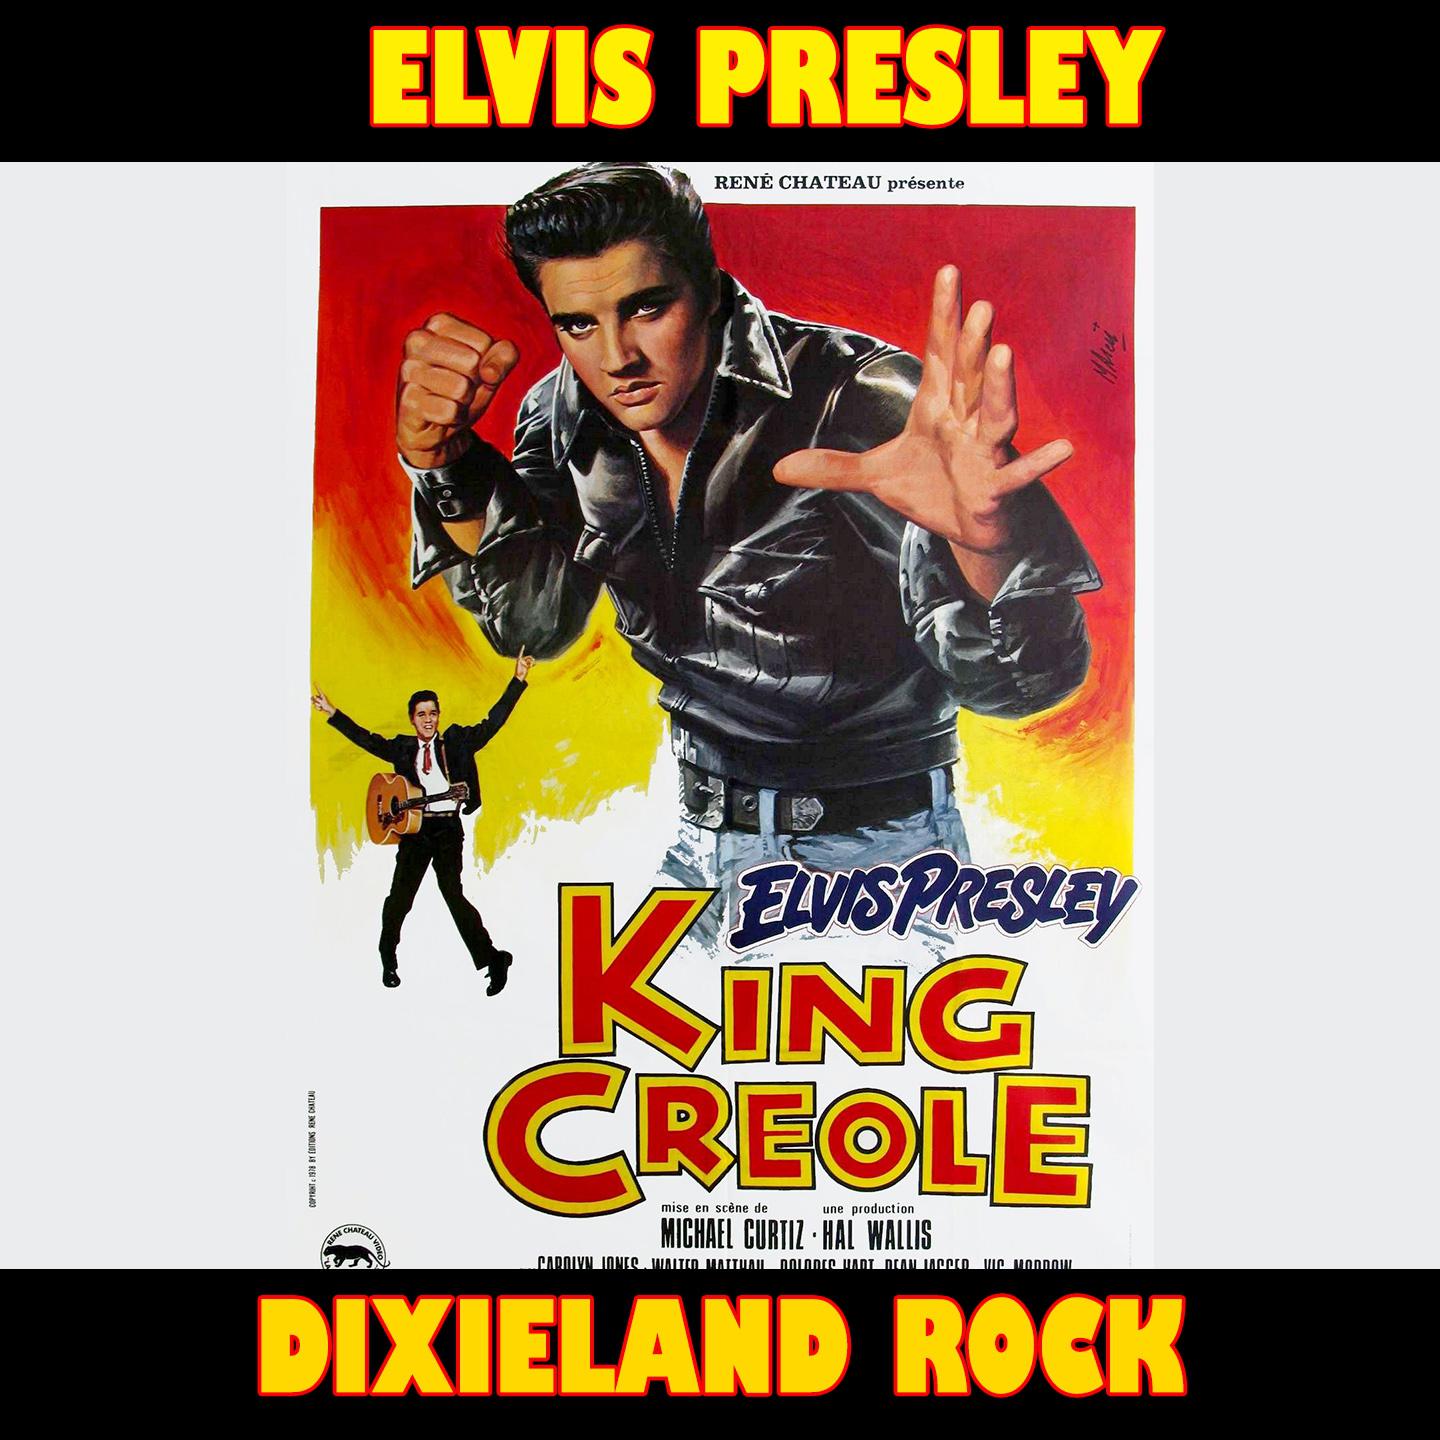 Dixieland Rock (From "King Creole" Original Soundtrack)